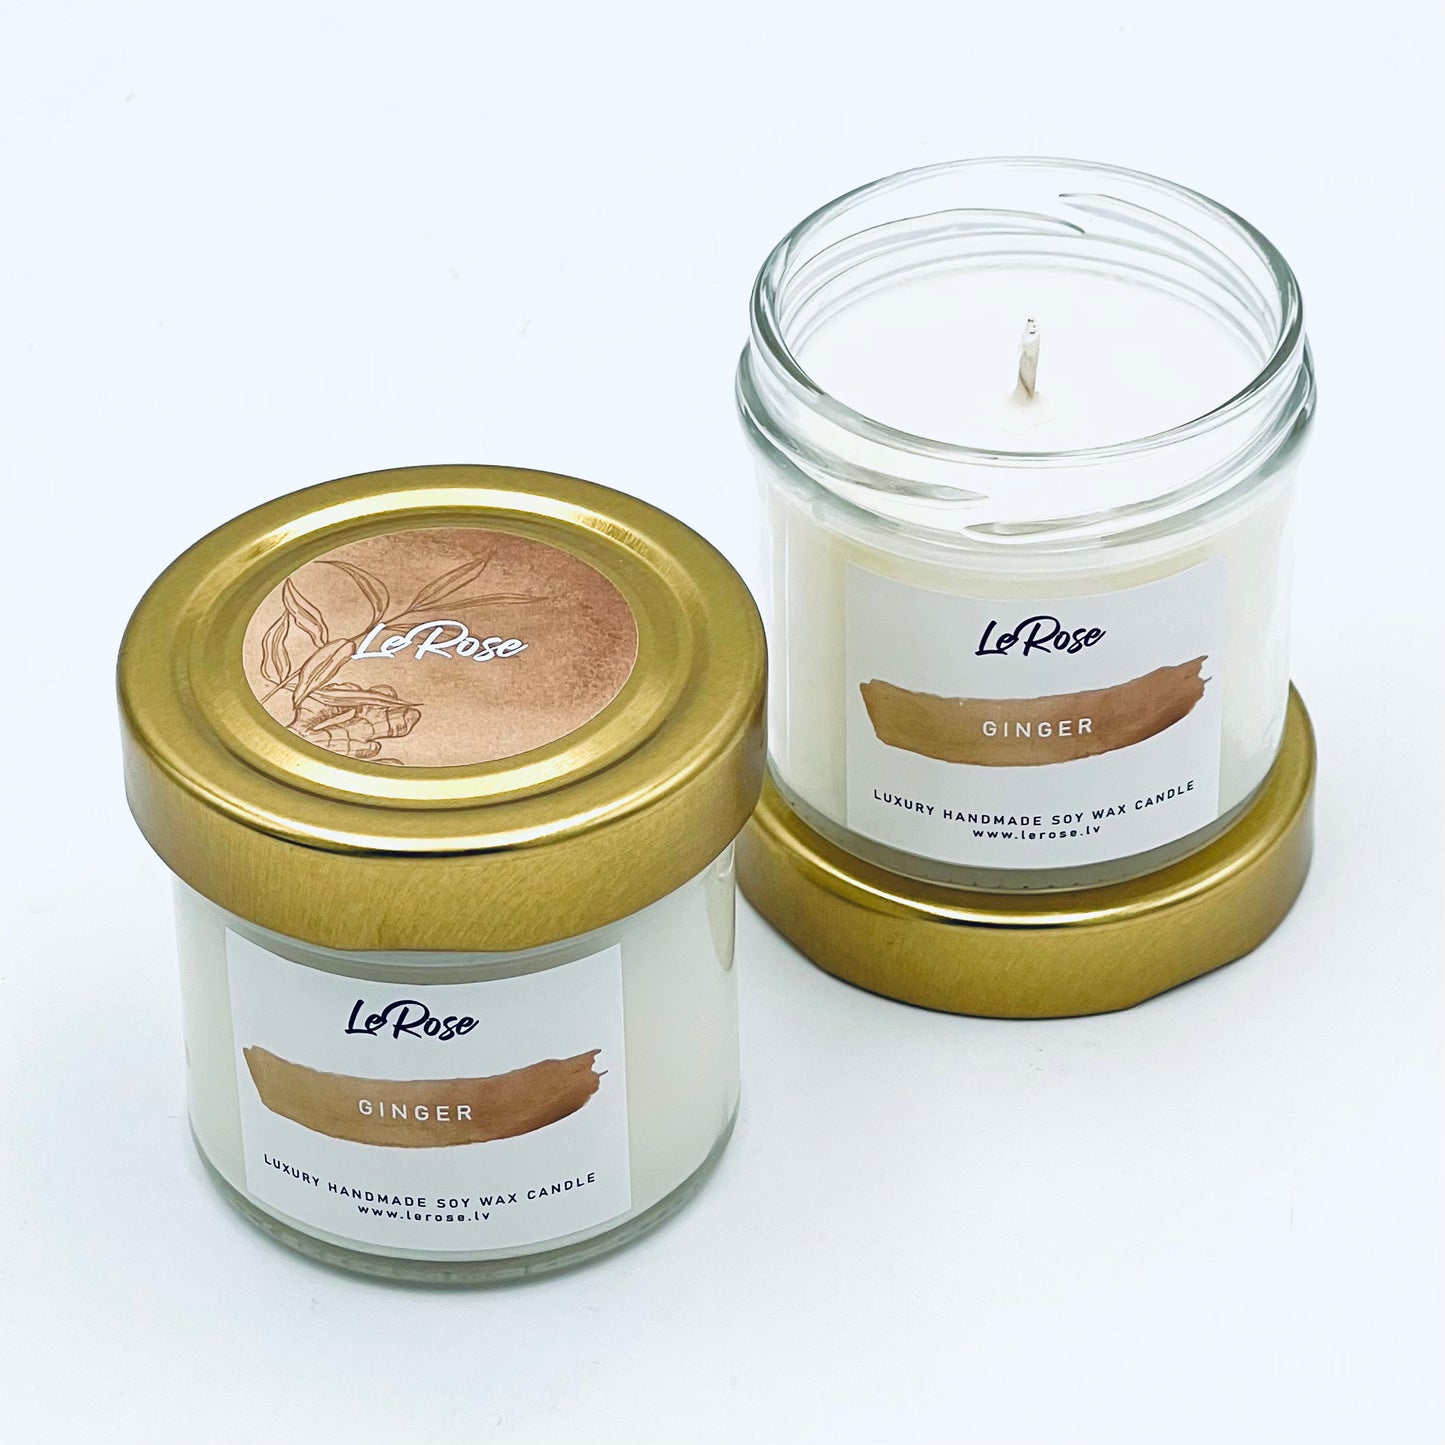 Soy wax candle "LeRose" Ginger, 25 h